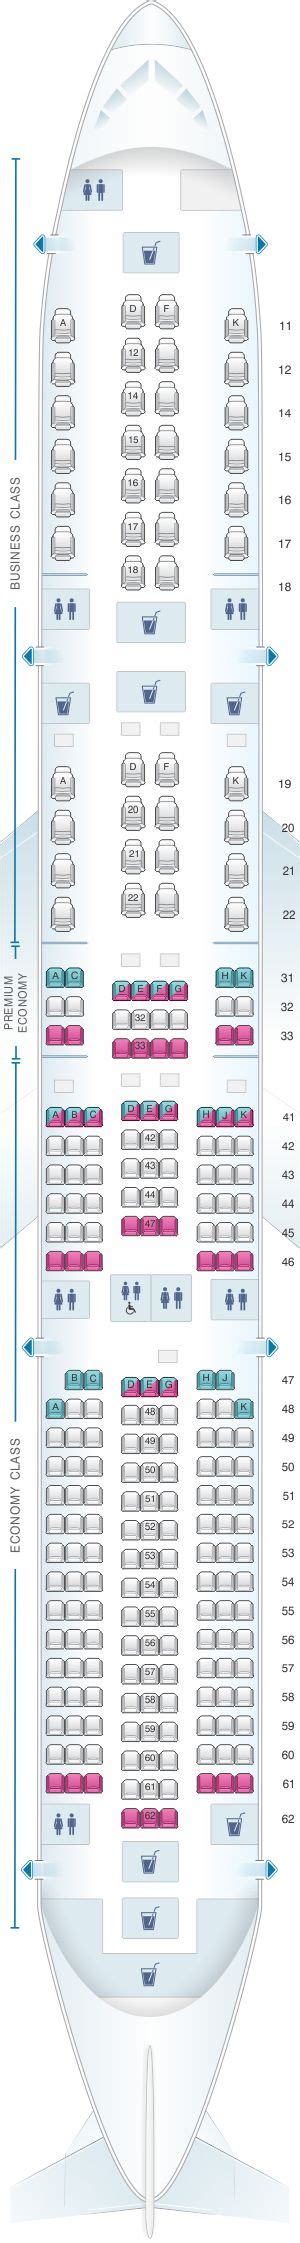 Singapore airlines airbus a350 seat map. Seat Map Singapore Airlines Airbus A350 900 | Singapore ...